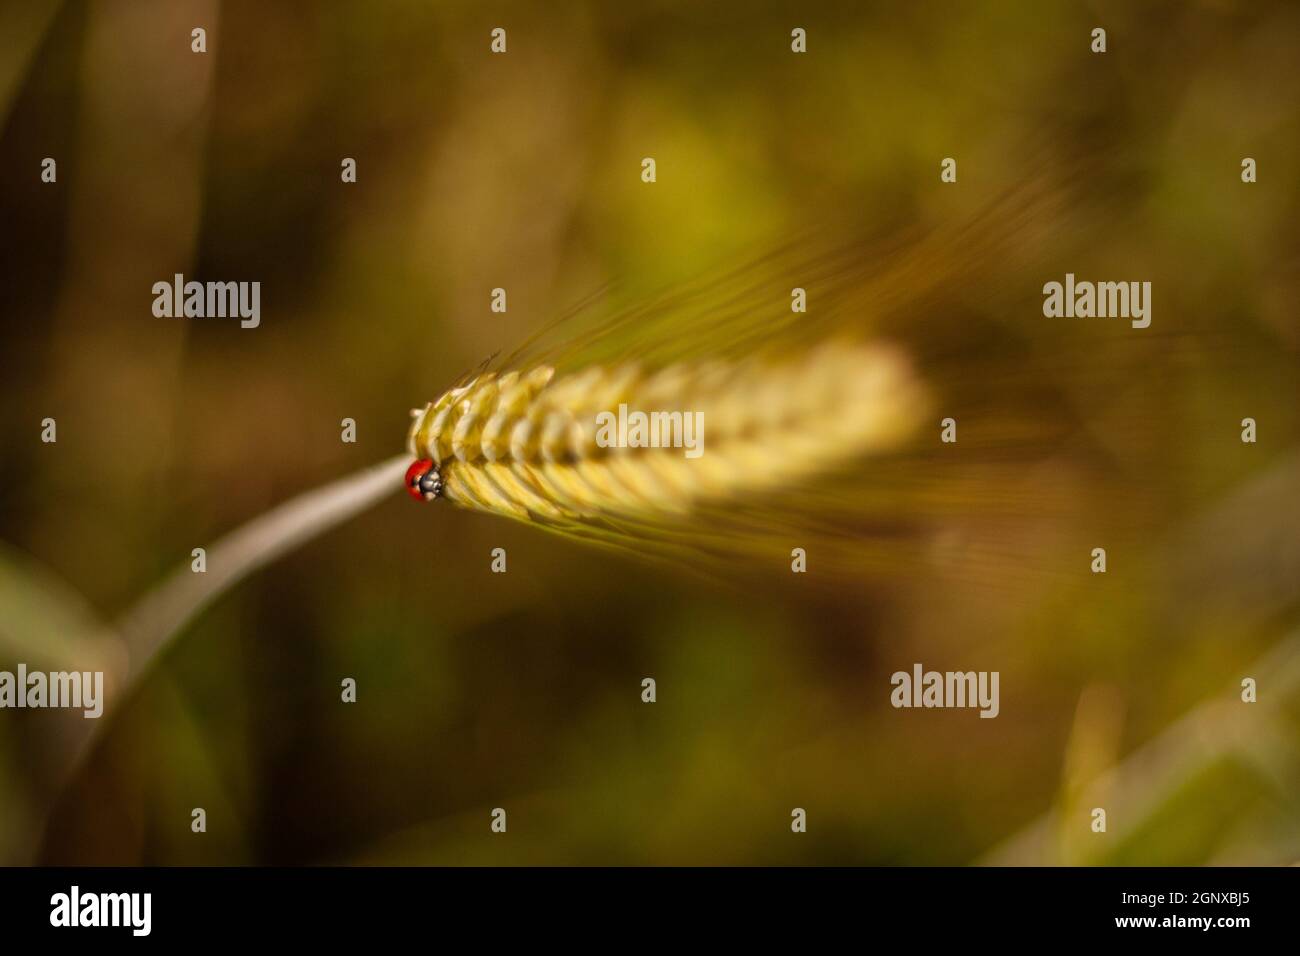 Ladybug sitting on an ear of grain | Close up photo of a ladybug, small insect from beettle family, on a grain with blurred background Stock Photo